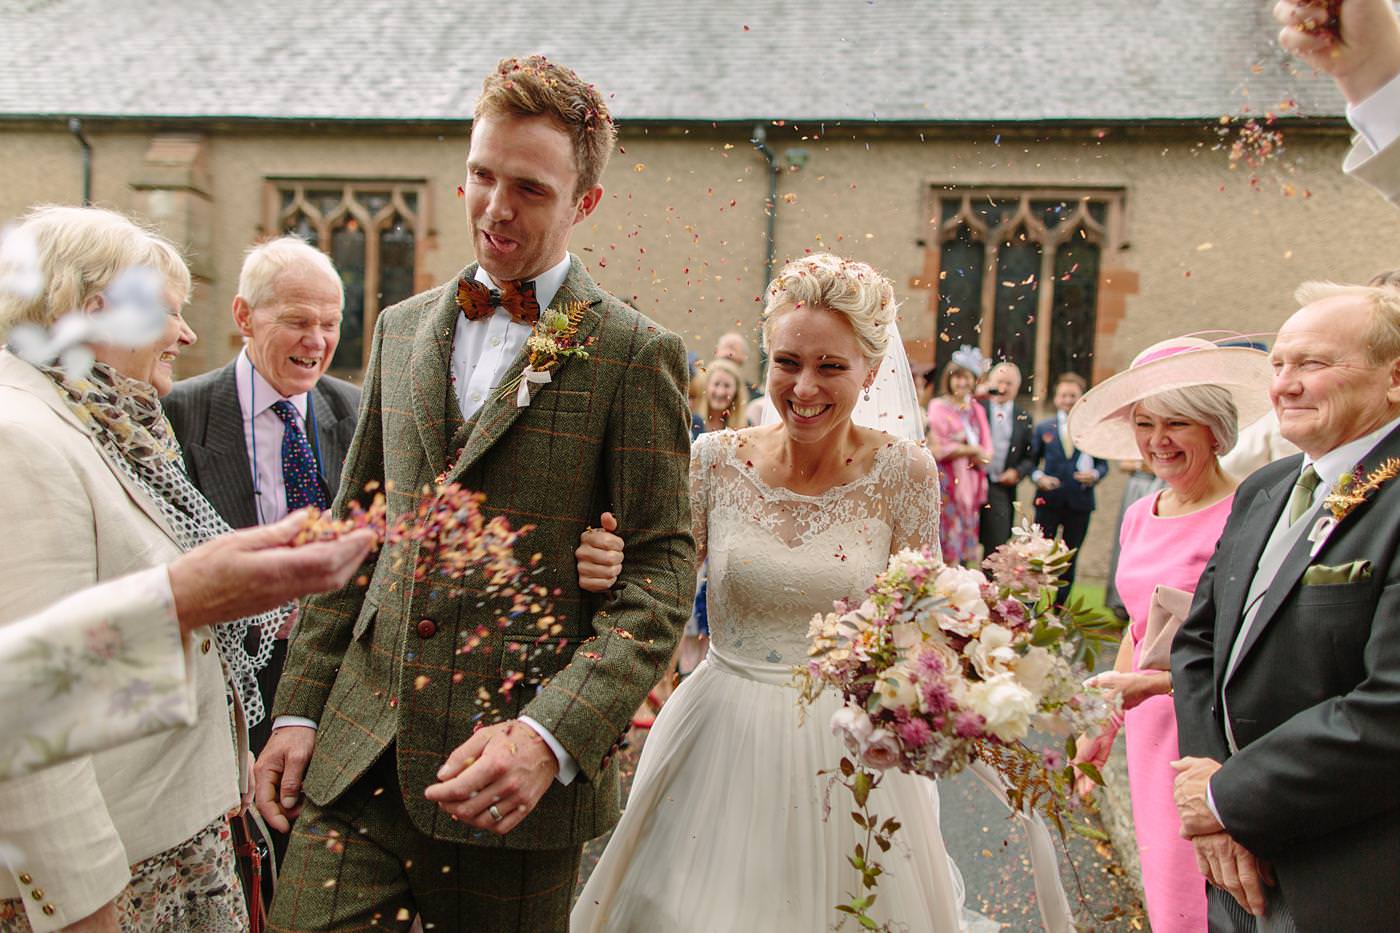 In this North Wales wedding, a bride and groom joyfully walk down the aisle showered with confetti.